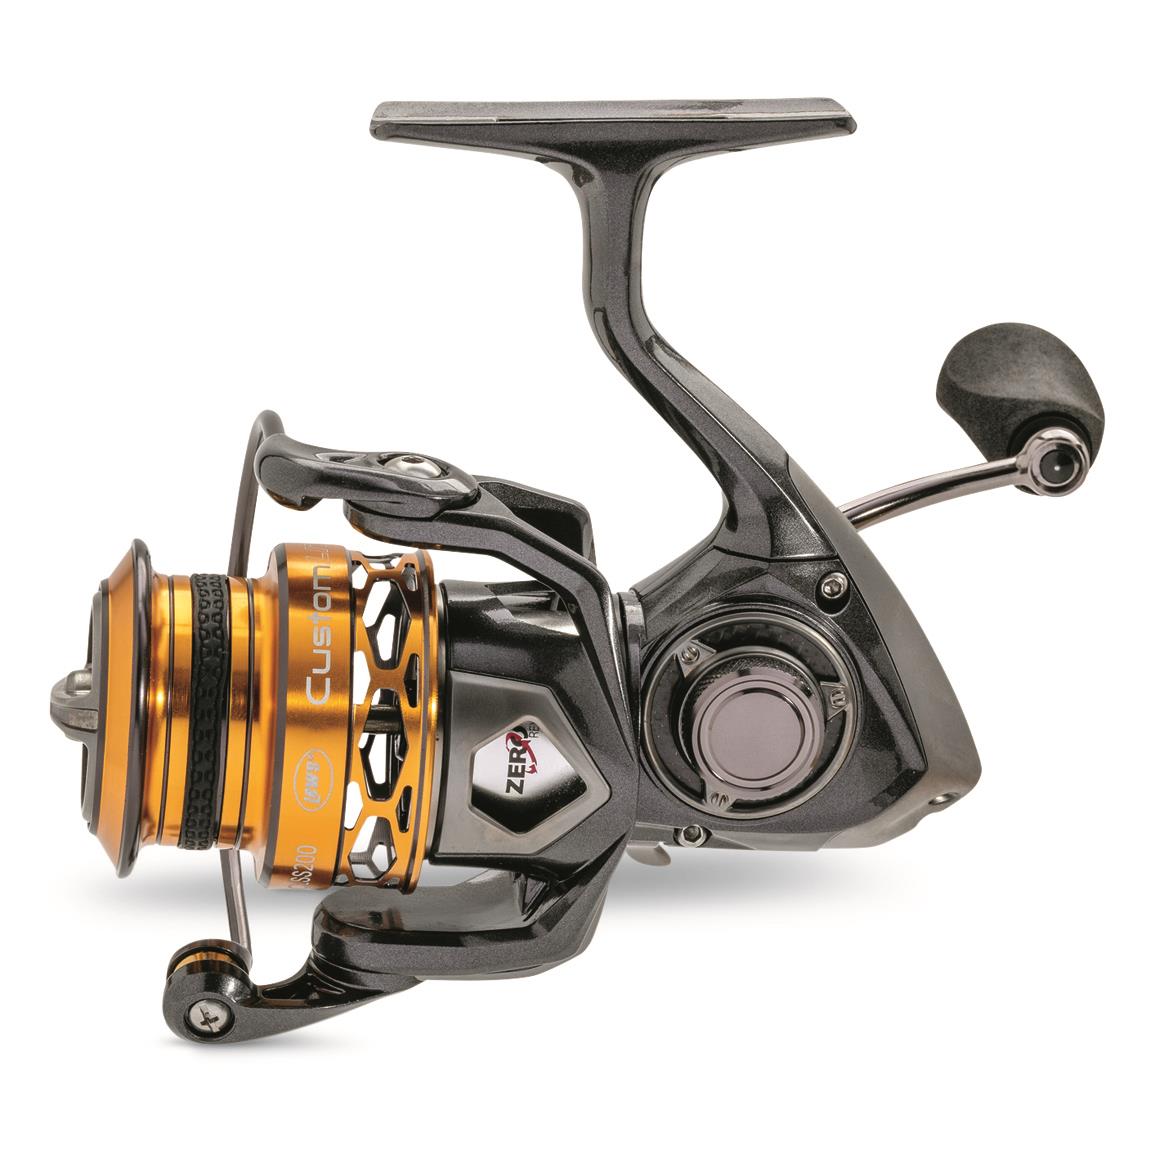 Mr. Crappie Wally Marshall Pro Target Spinning Reel, 5.2:1 Gear Ratio -  737363, Spinning Reels at Sportsman's Guide